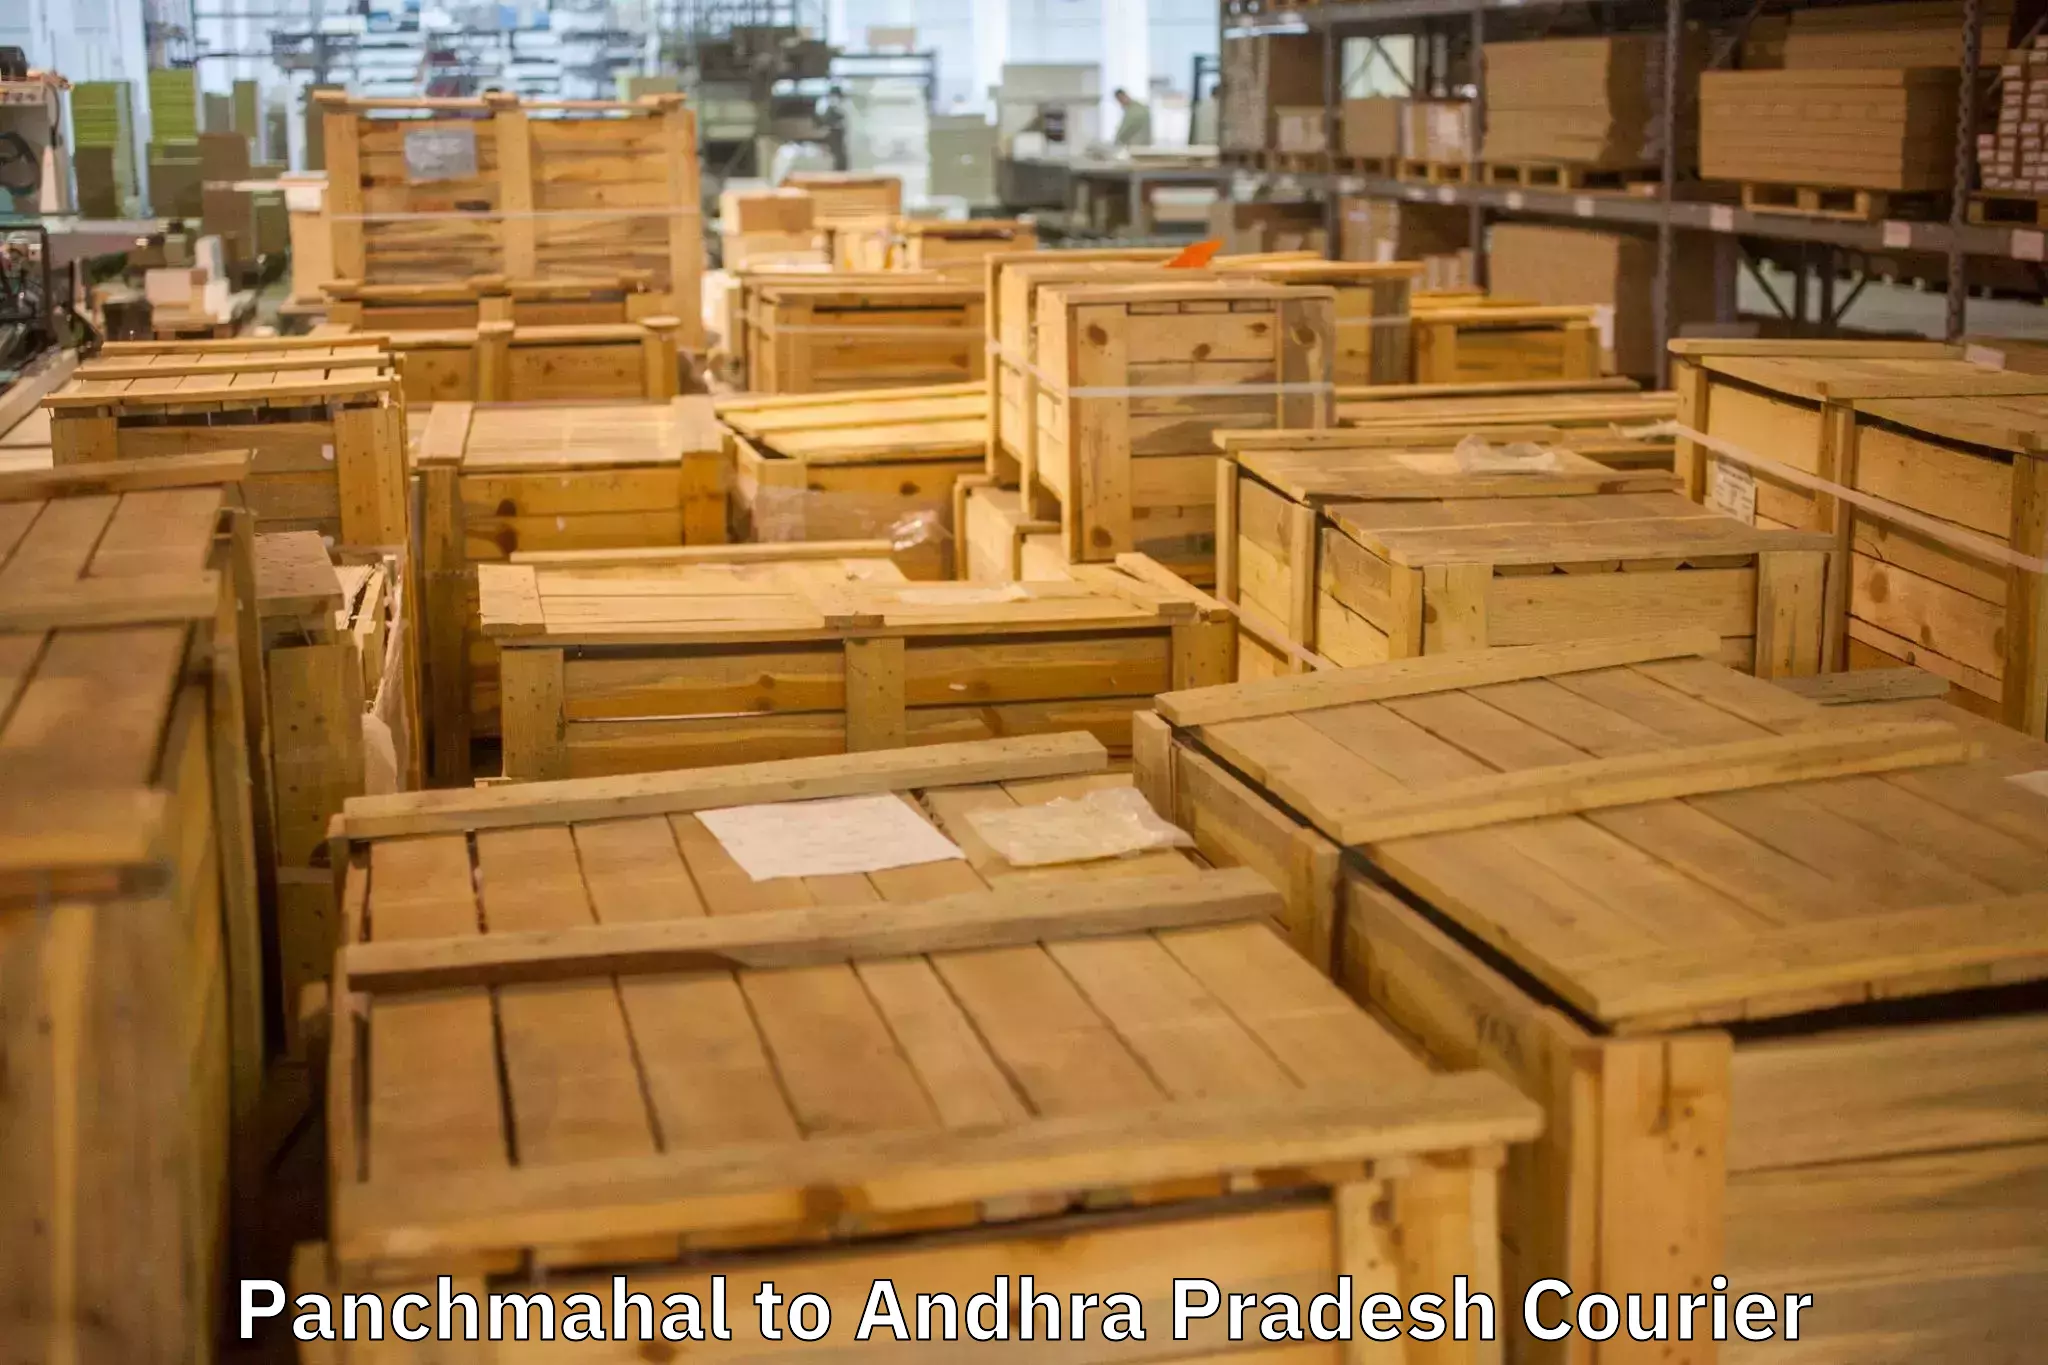 Trusted relocation experts Panchmahal to Andhra Pradesh